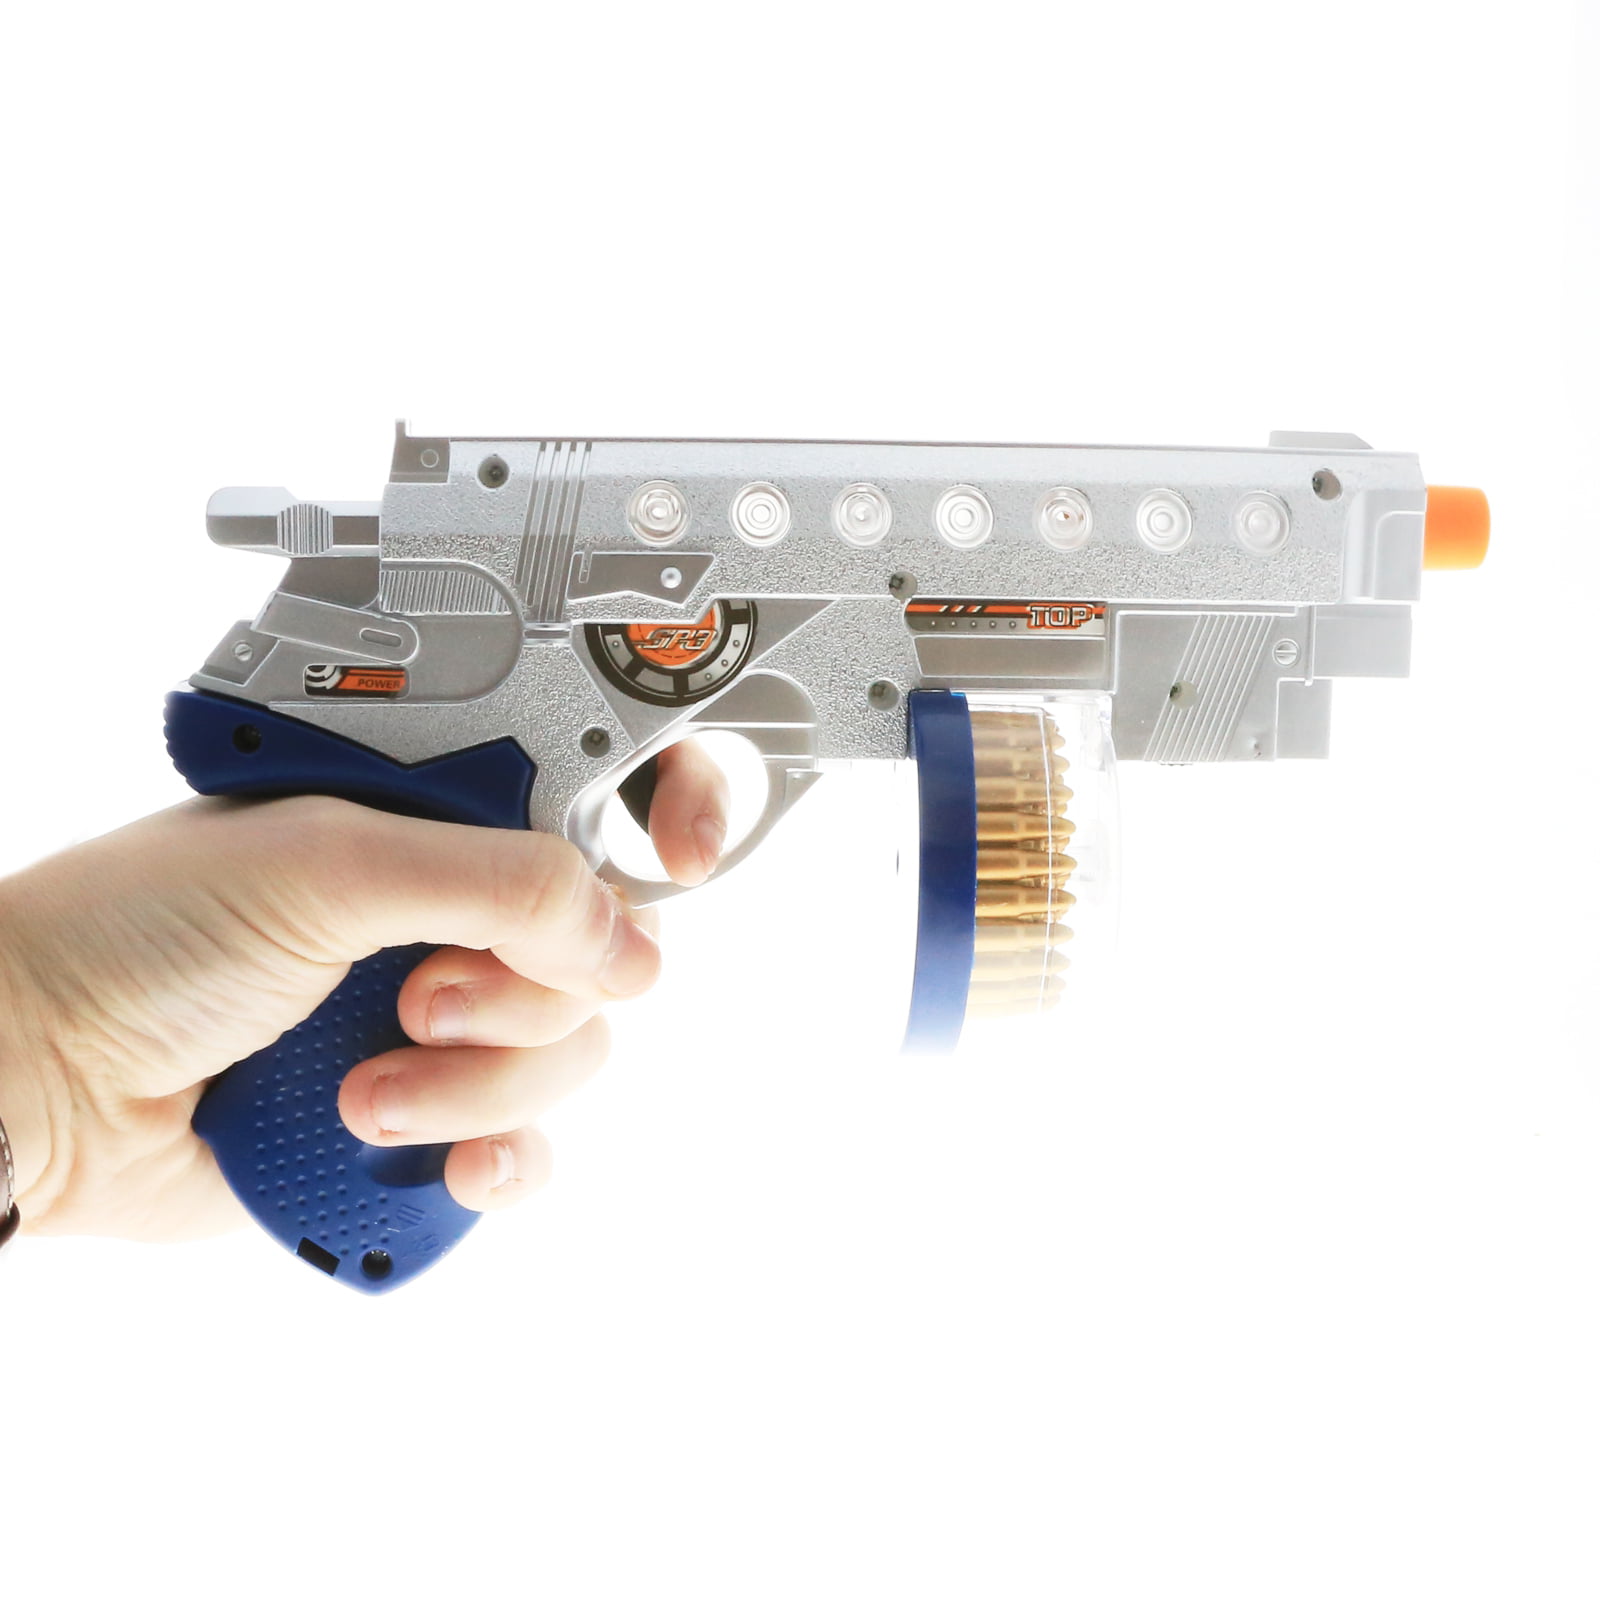 Blue Space Enforcer Toy Gun Blaster With Vibrant Spinning Lights and Sound 